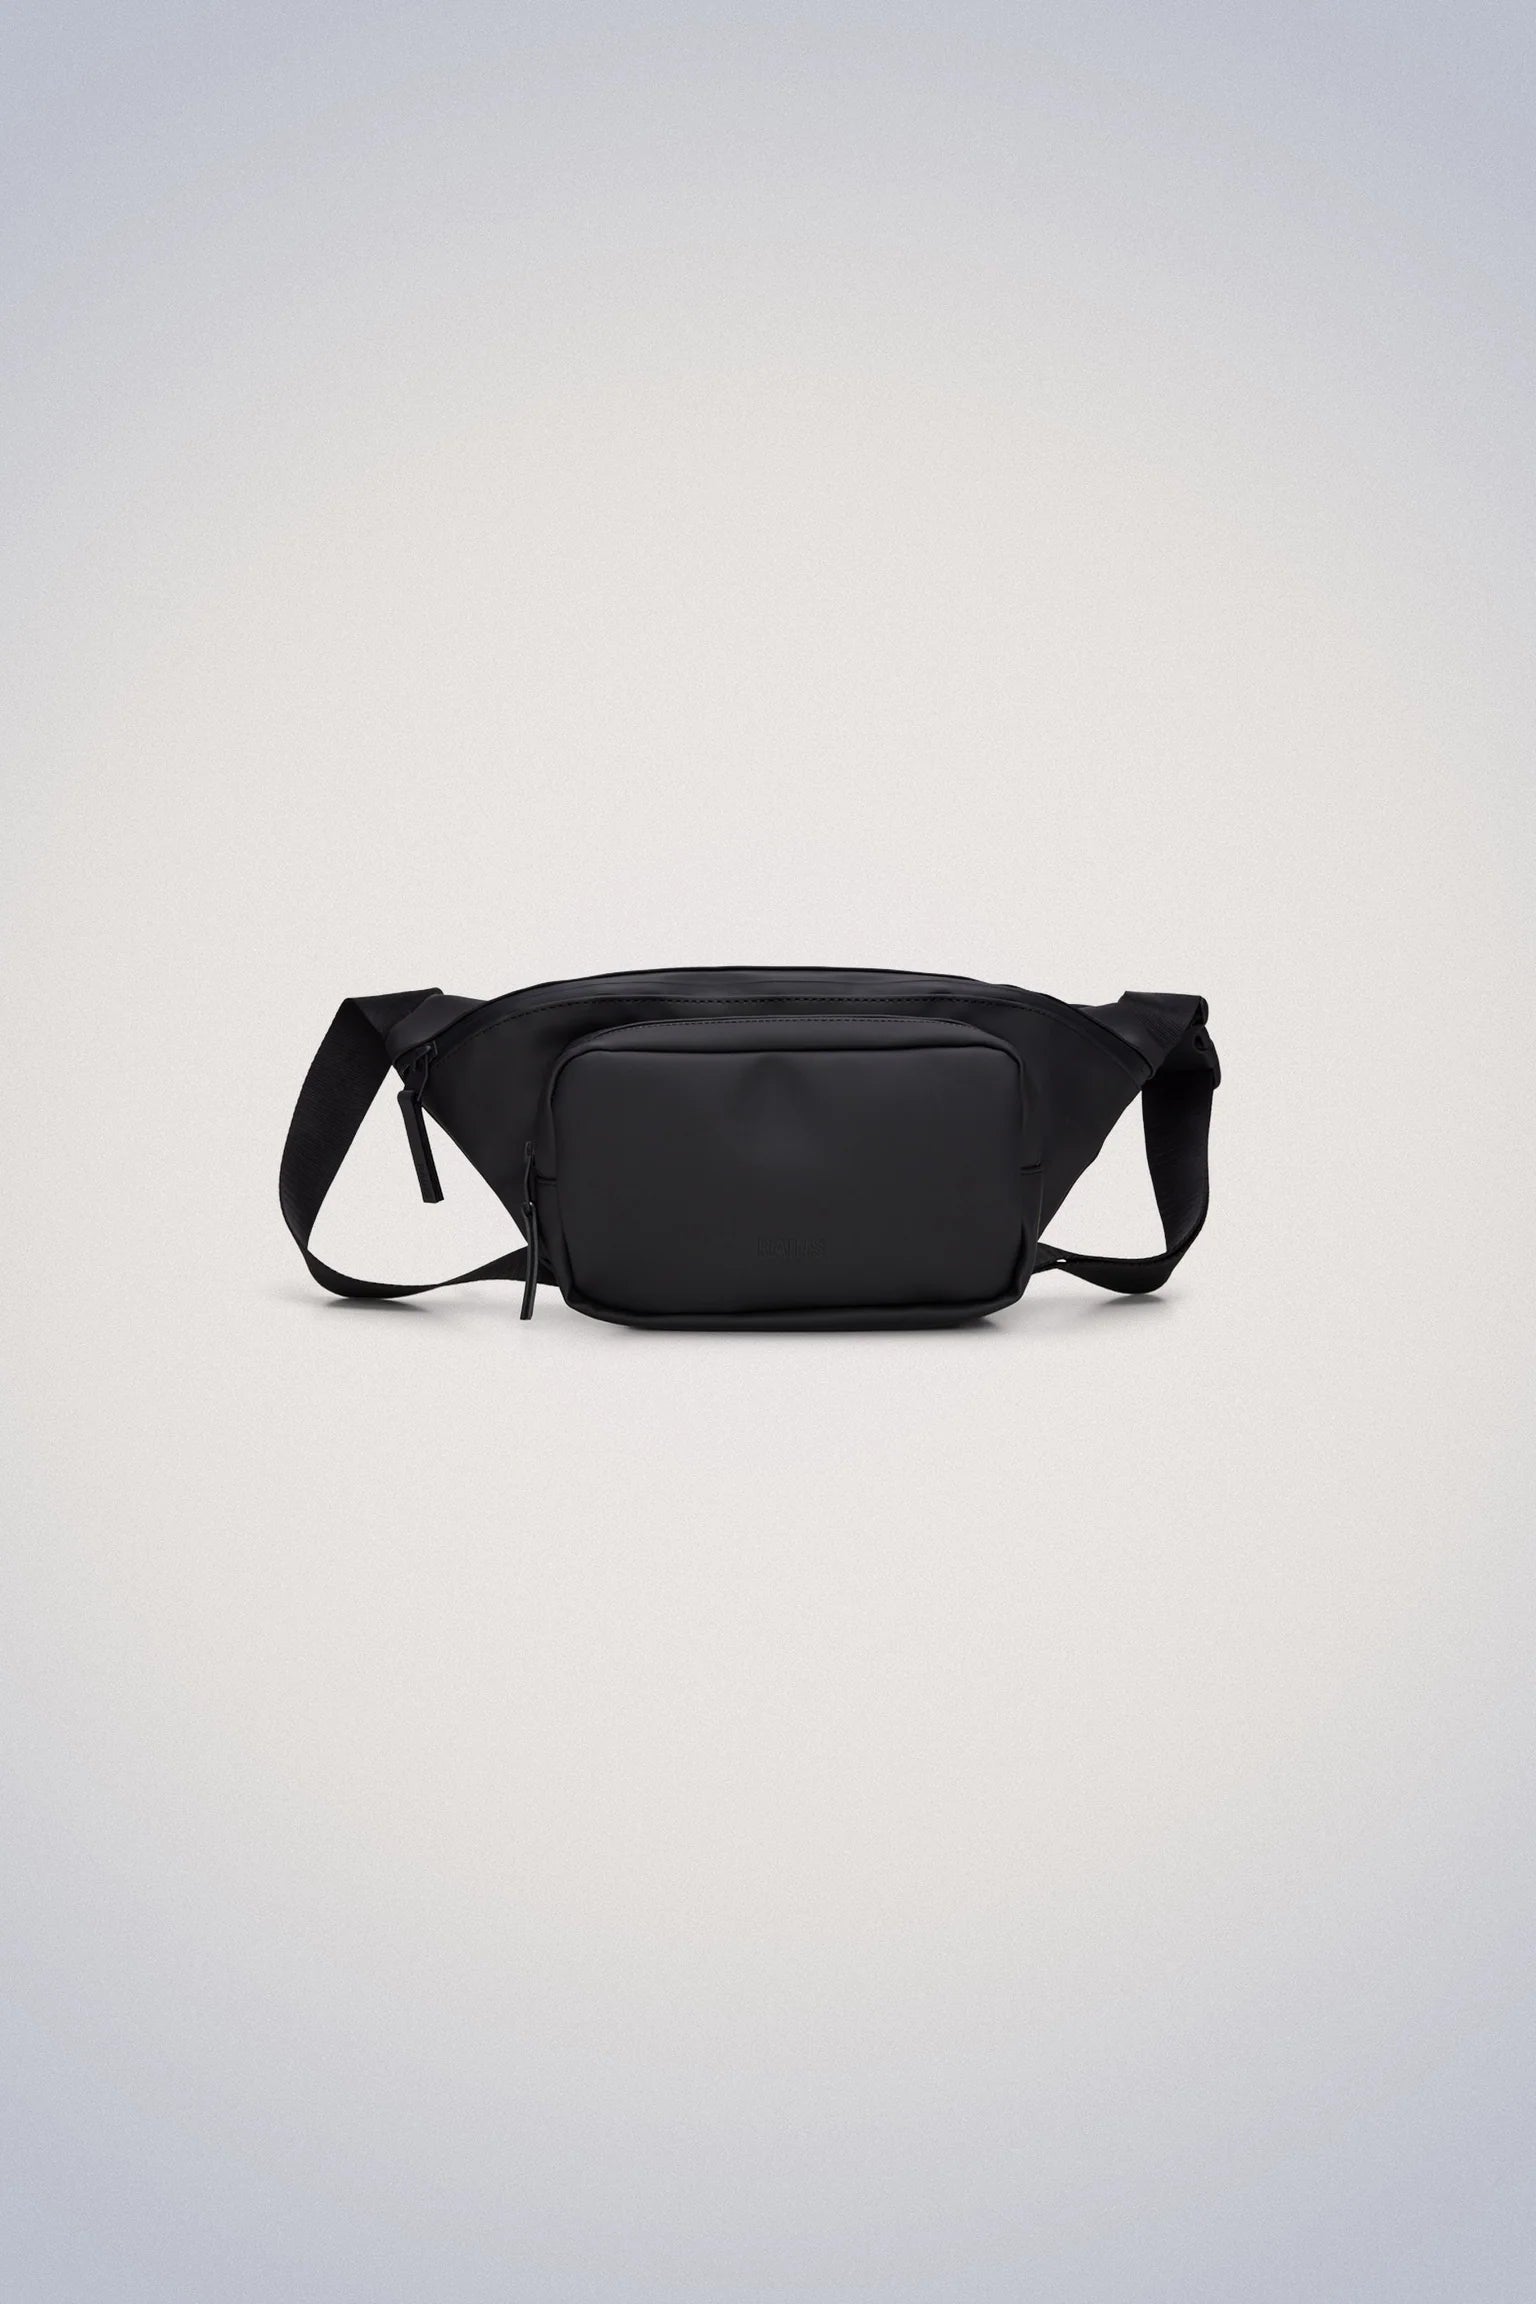 A functional Rains Bum Bag - Black with an adjustable webbing strap, set against a clean white background.